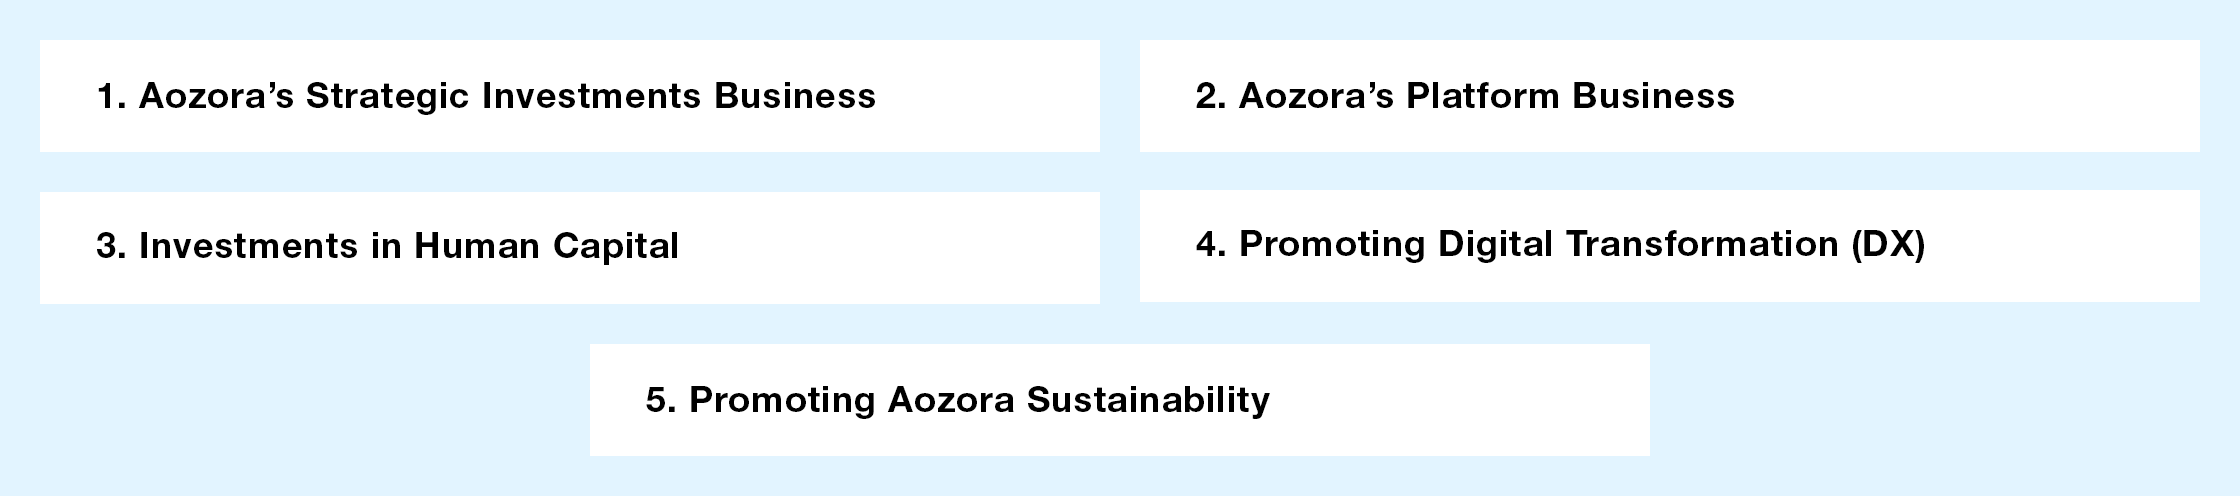 Outline of the new Mid-term Plan “Aozora 2025”